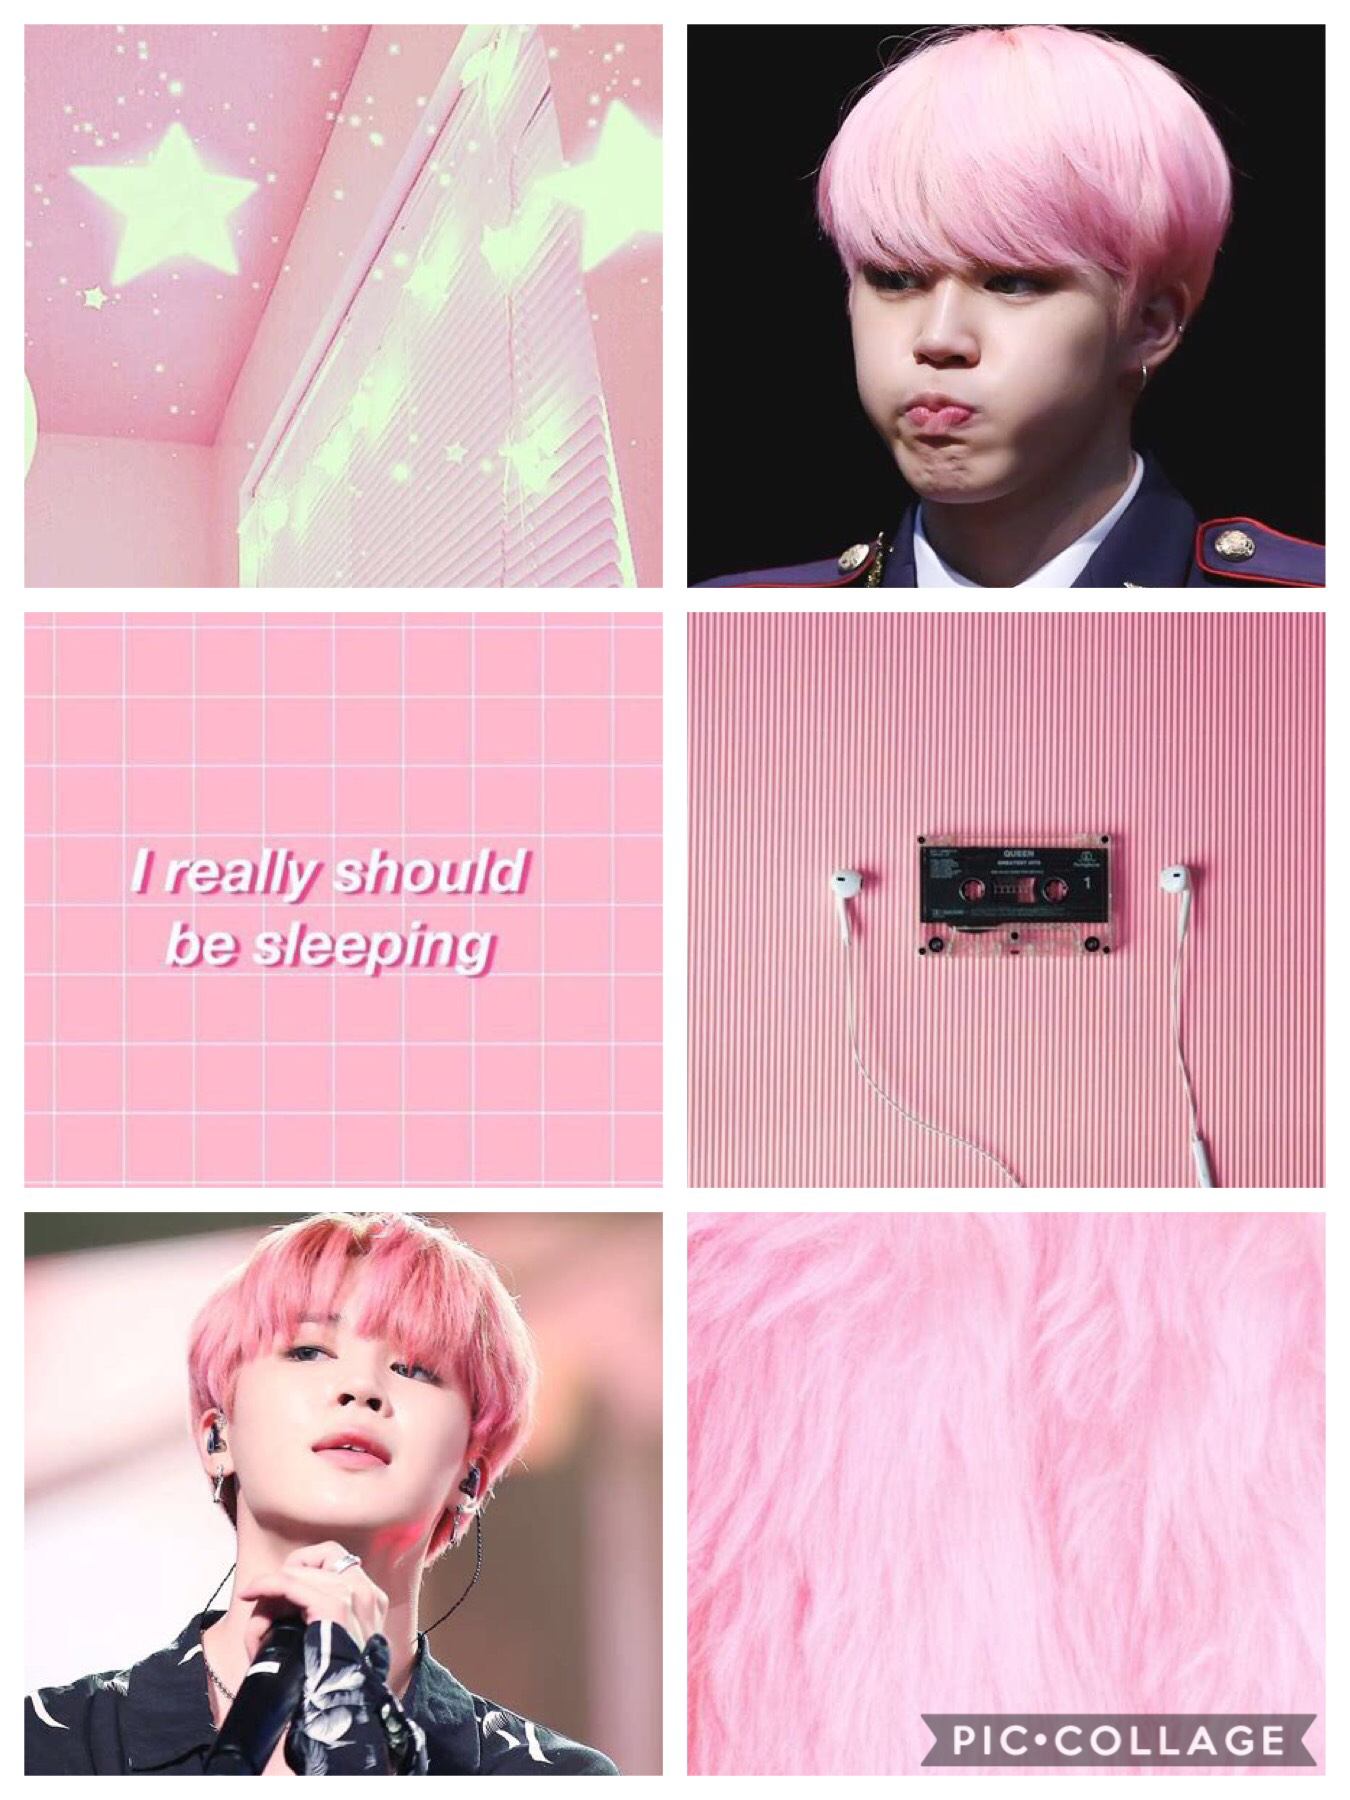 Jimin pink hair aesthetic wallpaper for ARMY💕💕💕💕